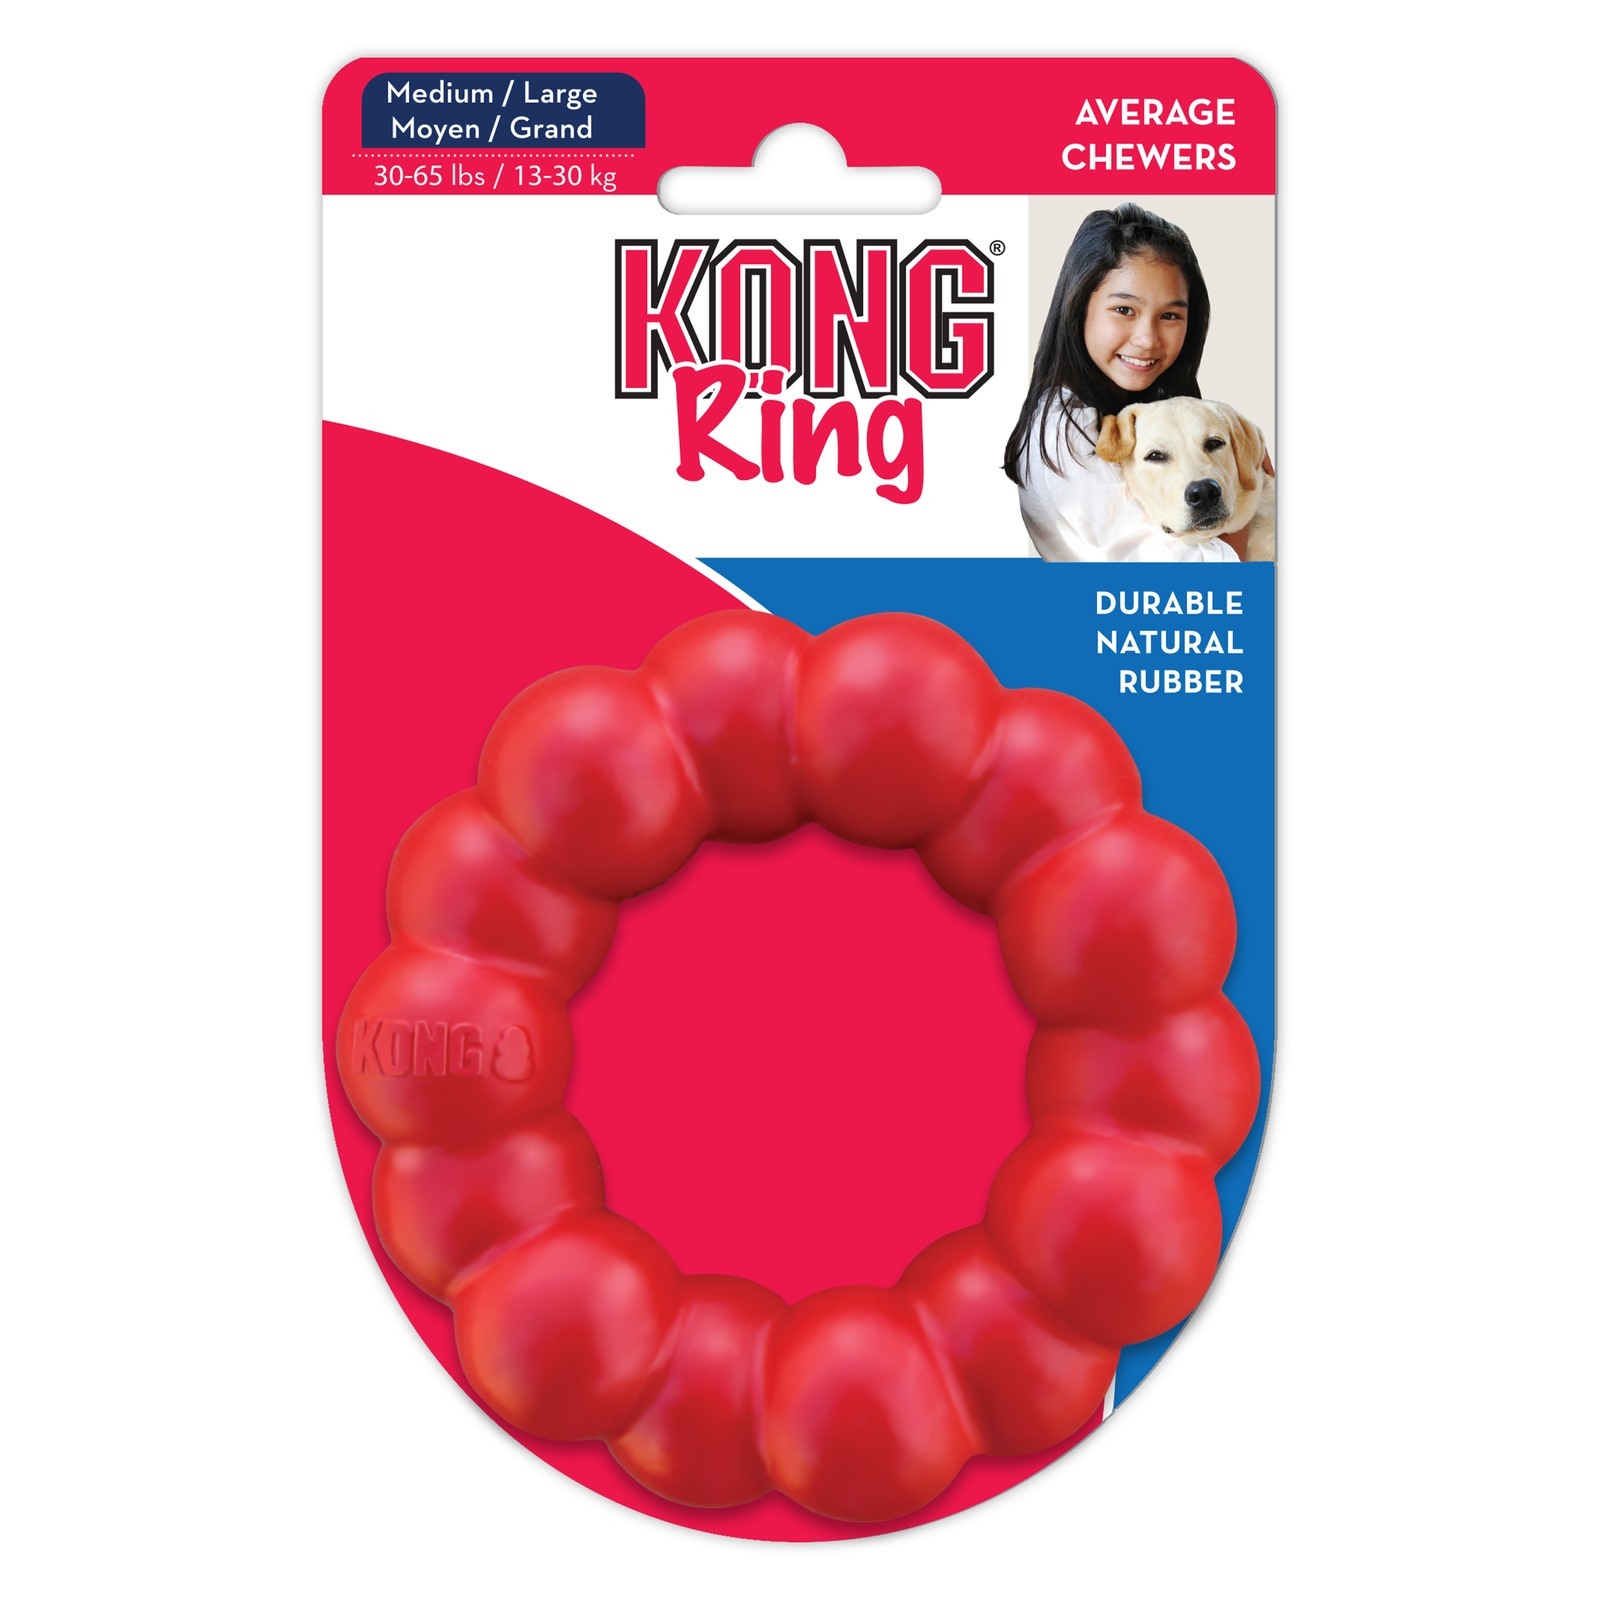 KONG Natural Red Rubber Ring Dog Toy for Healthy Teeth & Gums - Medium/Large - 3 Unit/s image 0